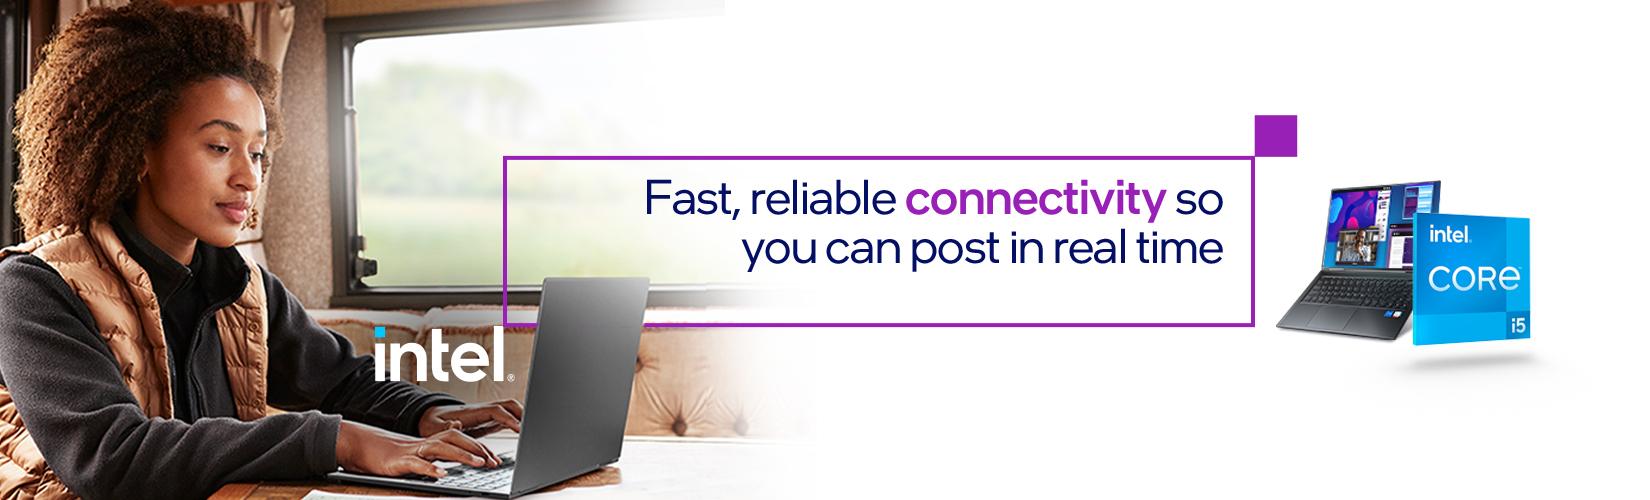 Intel. Fast, reliable connectivity so you can post in real time.